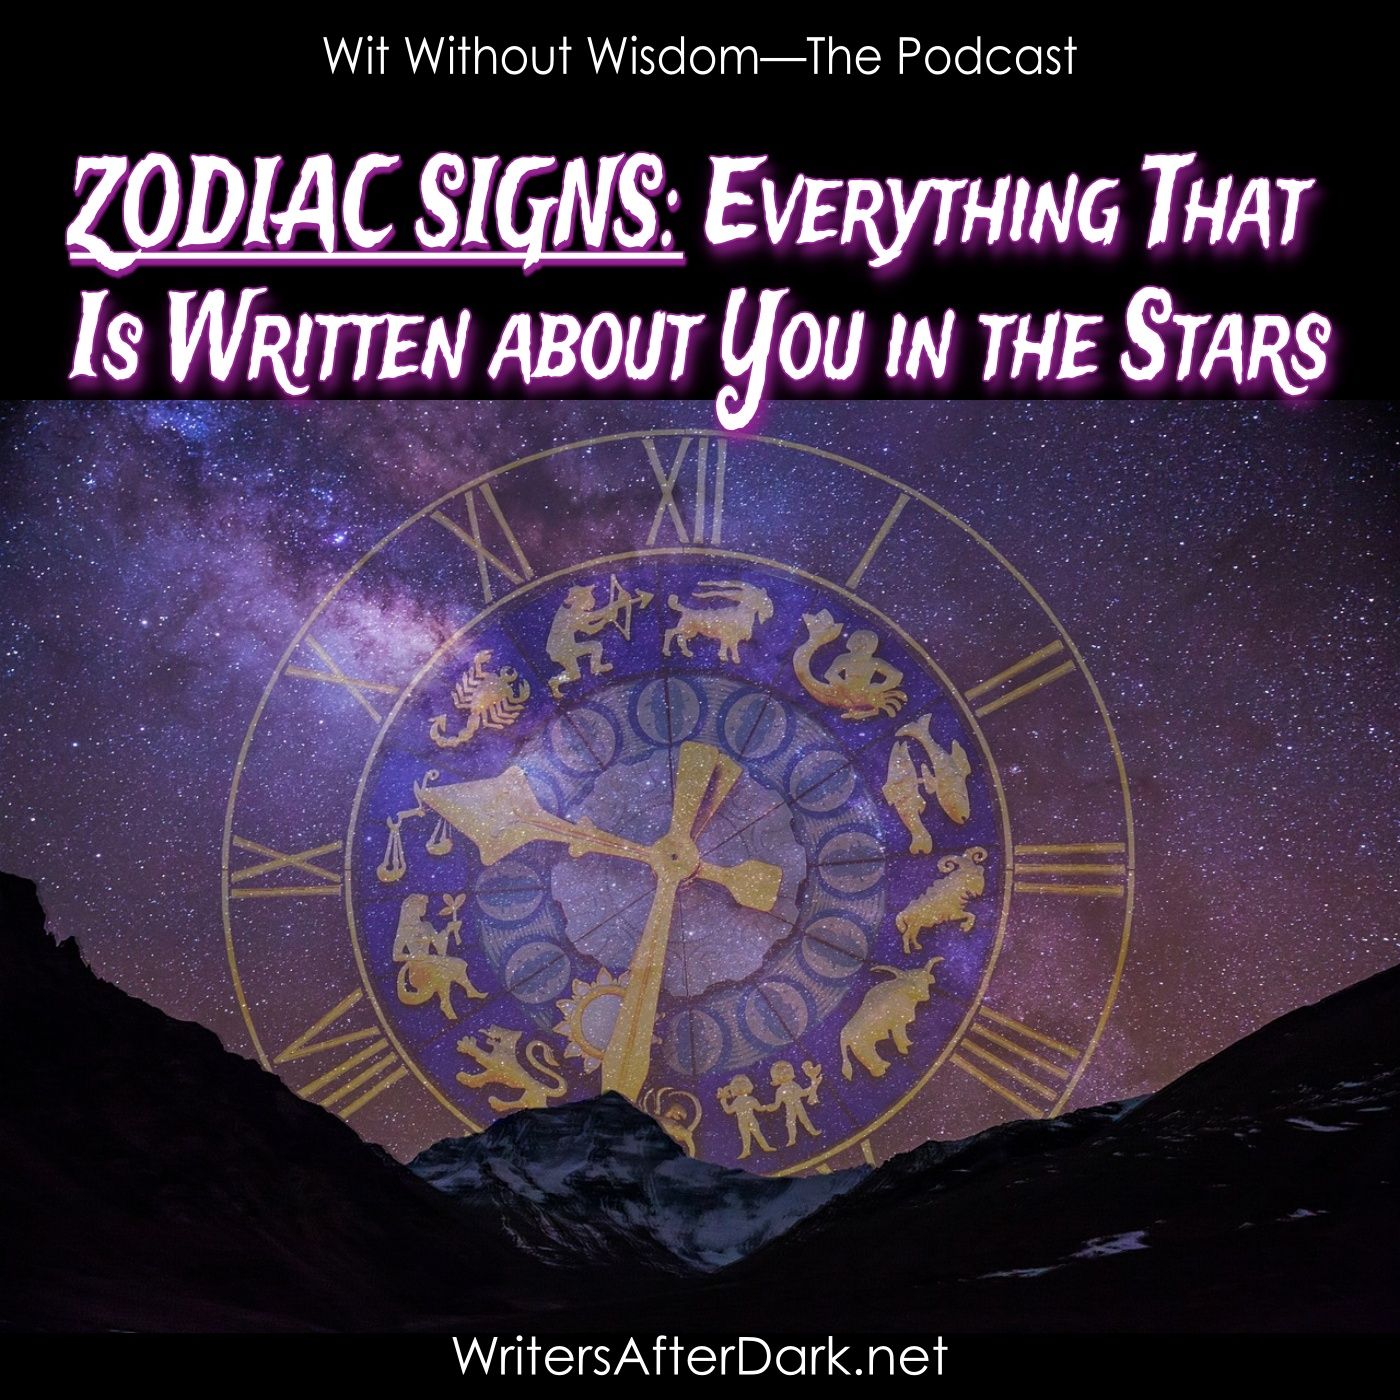 Zodiac Signs: Everything That is Written About You in the Stars